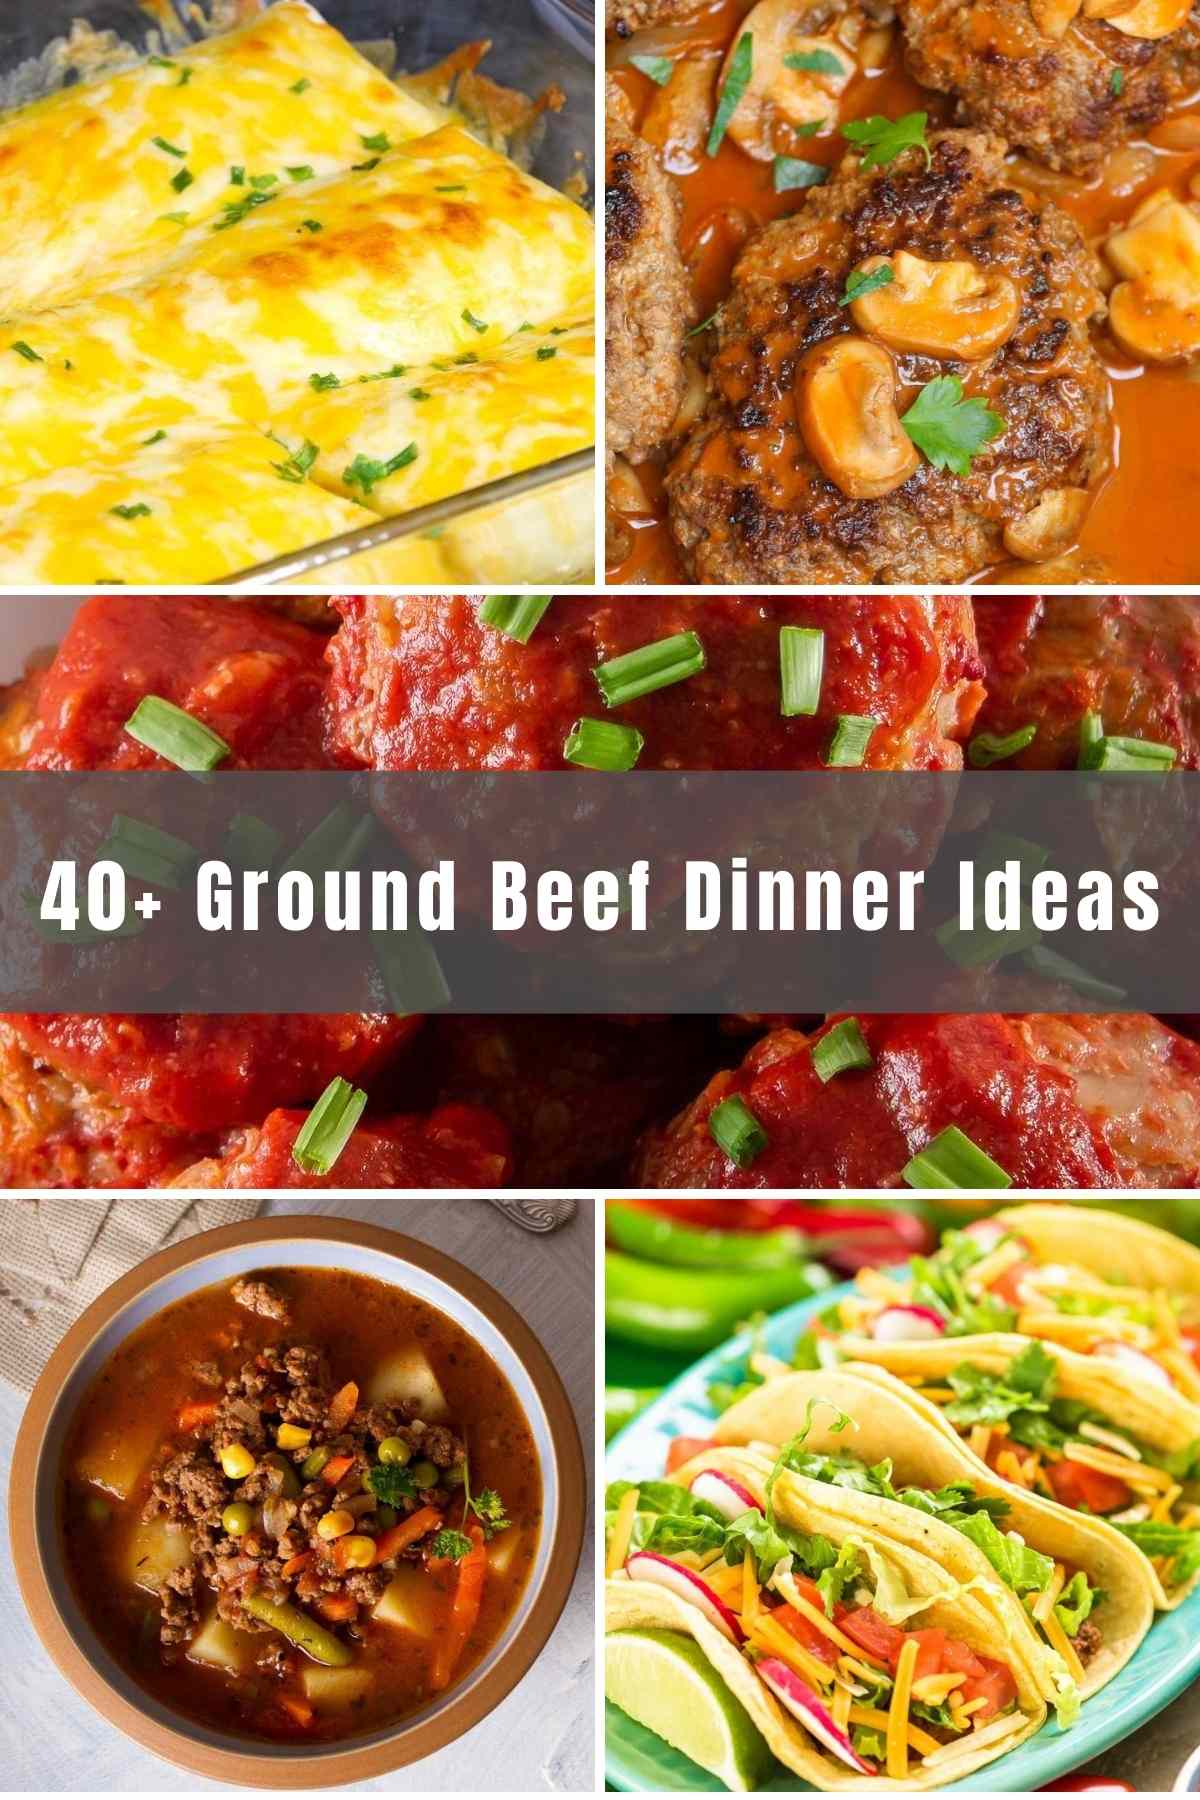 Wondering what you can do with ground beef for dinner? We’ve rounded up over 40 Easy Ground Beef Dinner Ideas, from meatballs to hamburgers, and everything in between. You’re sure to find a few recipes that your family will love!